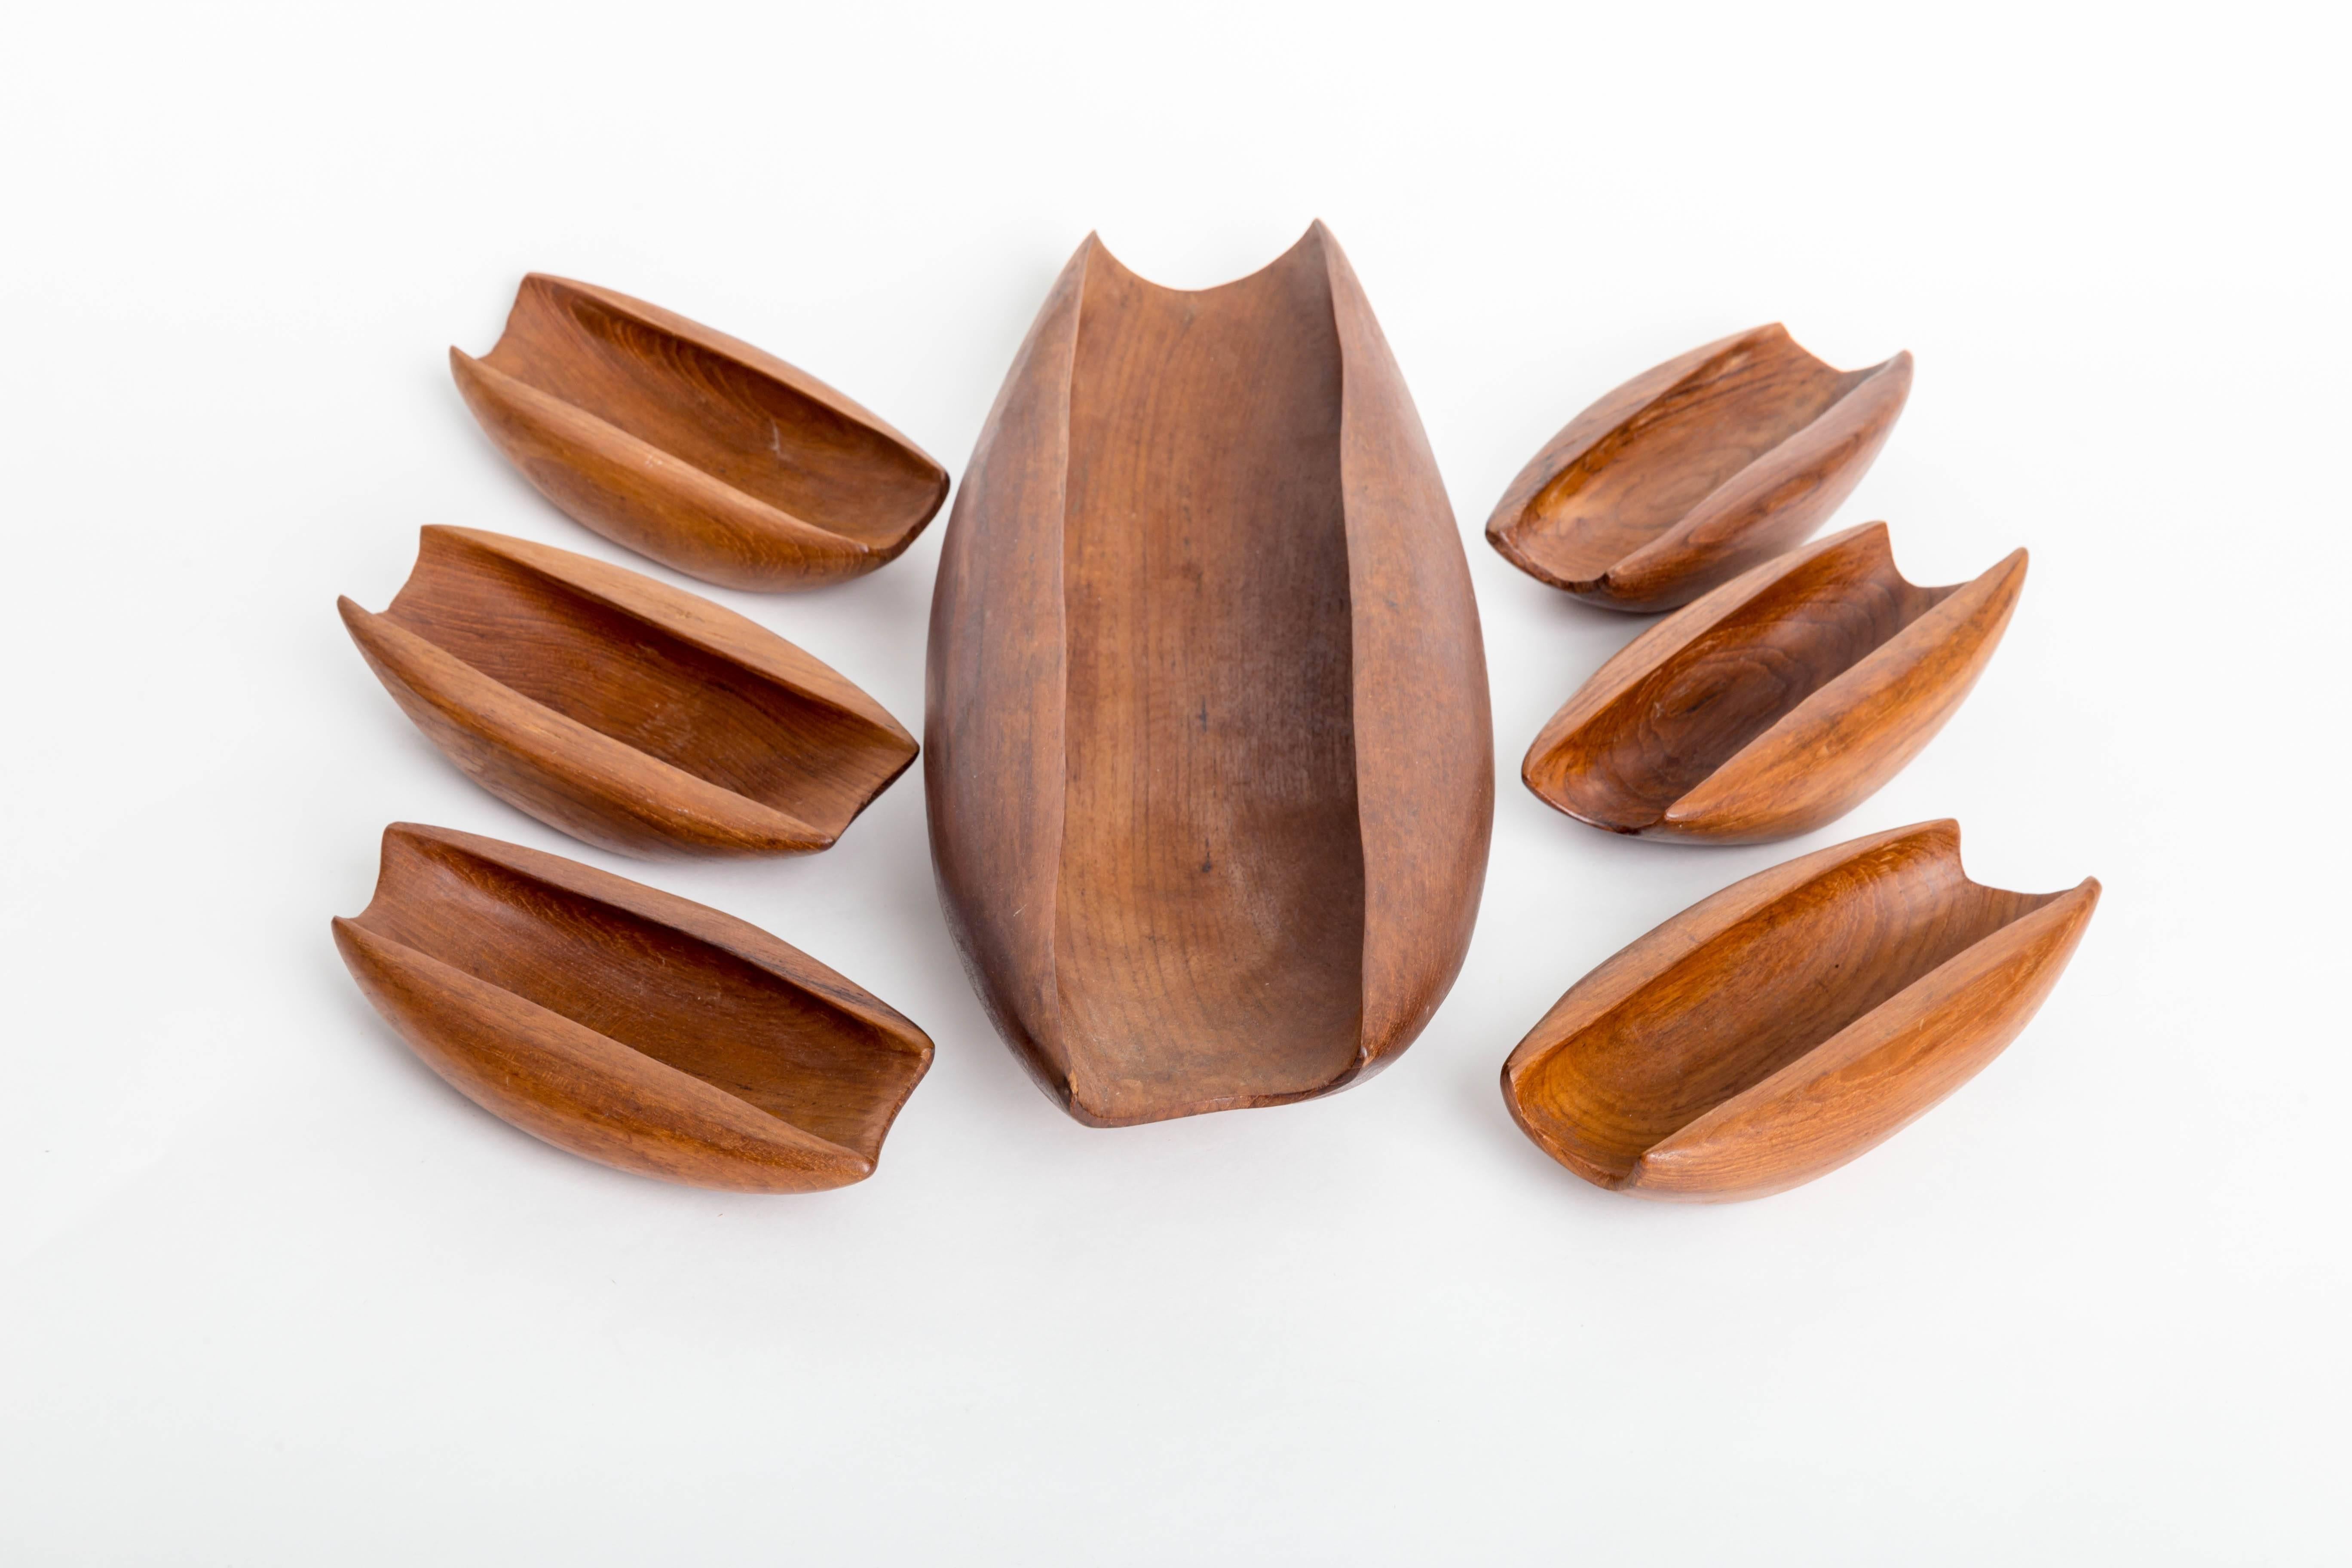 Seven piece solid teak vessels carved from single pieces of wood
One large vessel with six smaller vessels.